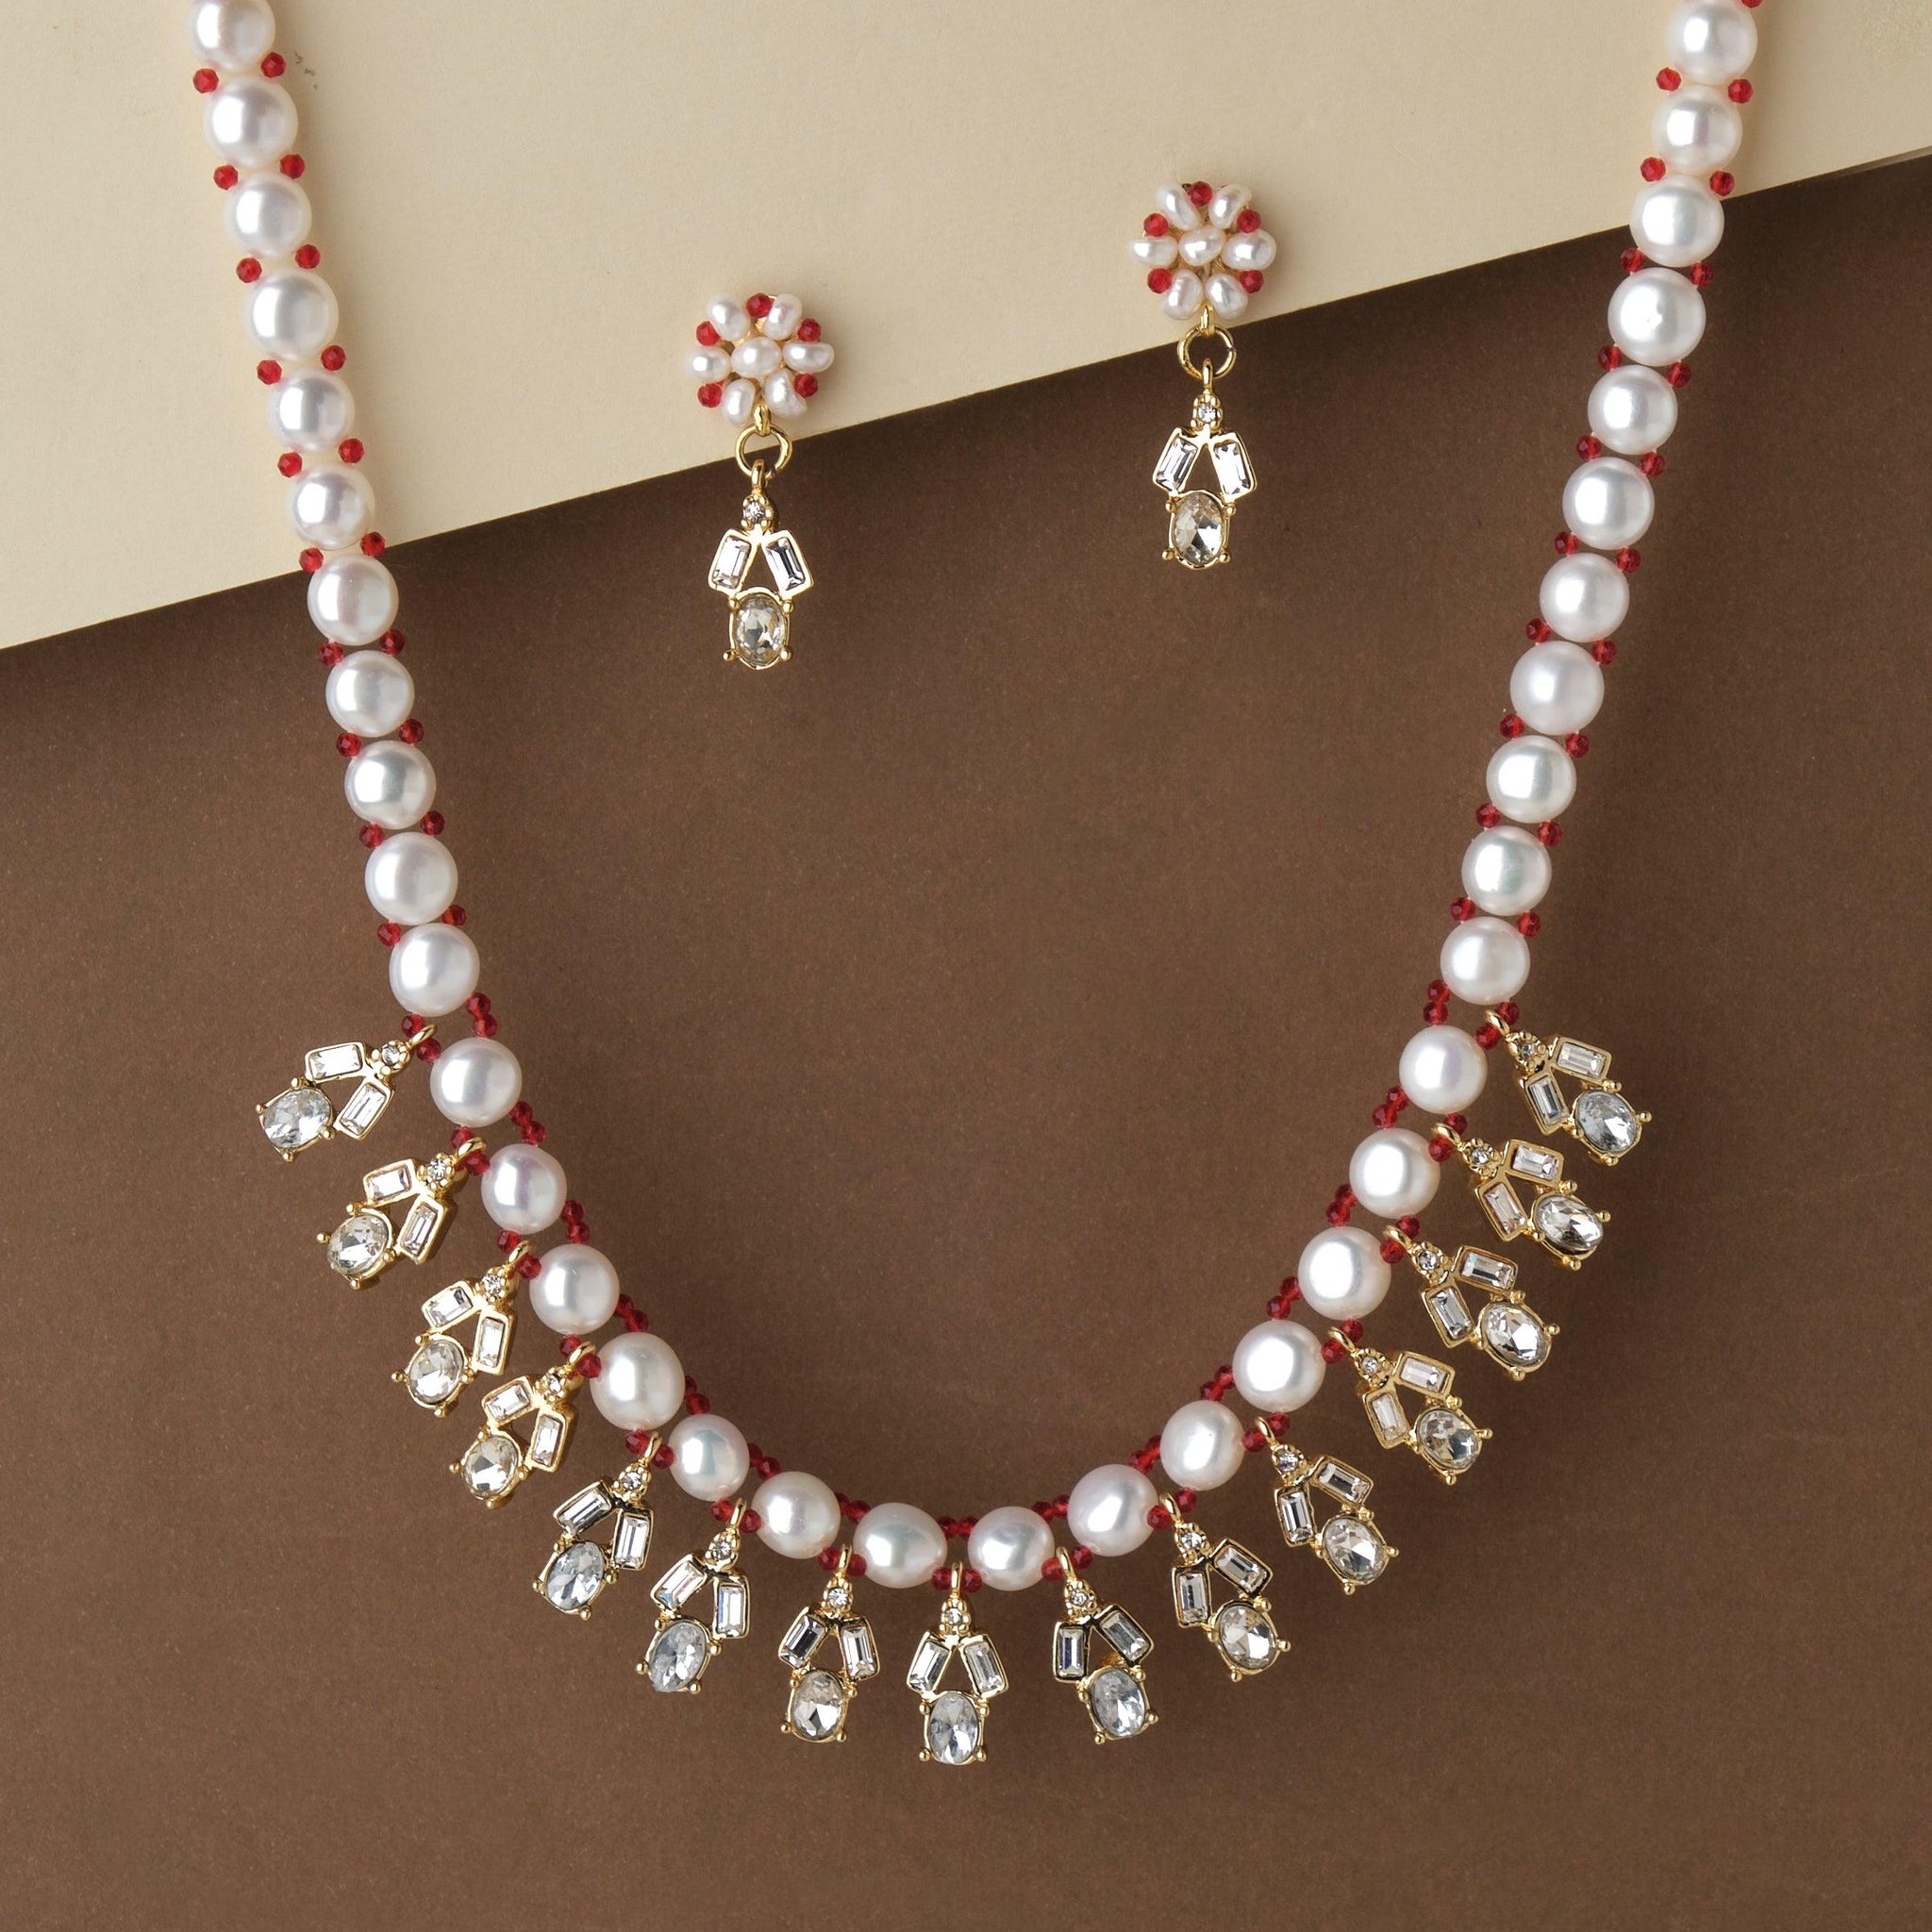 Fashionable Pearl & Beads Necklace Set - Chandrani Pearls